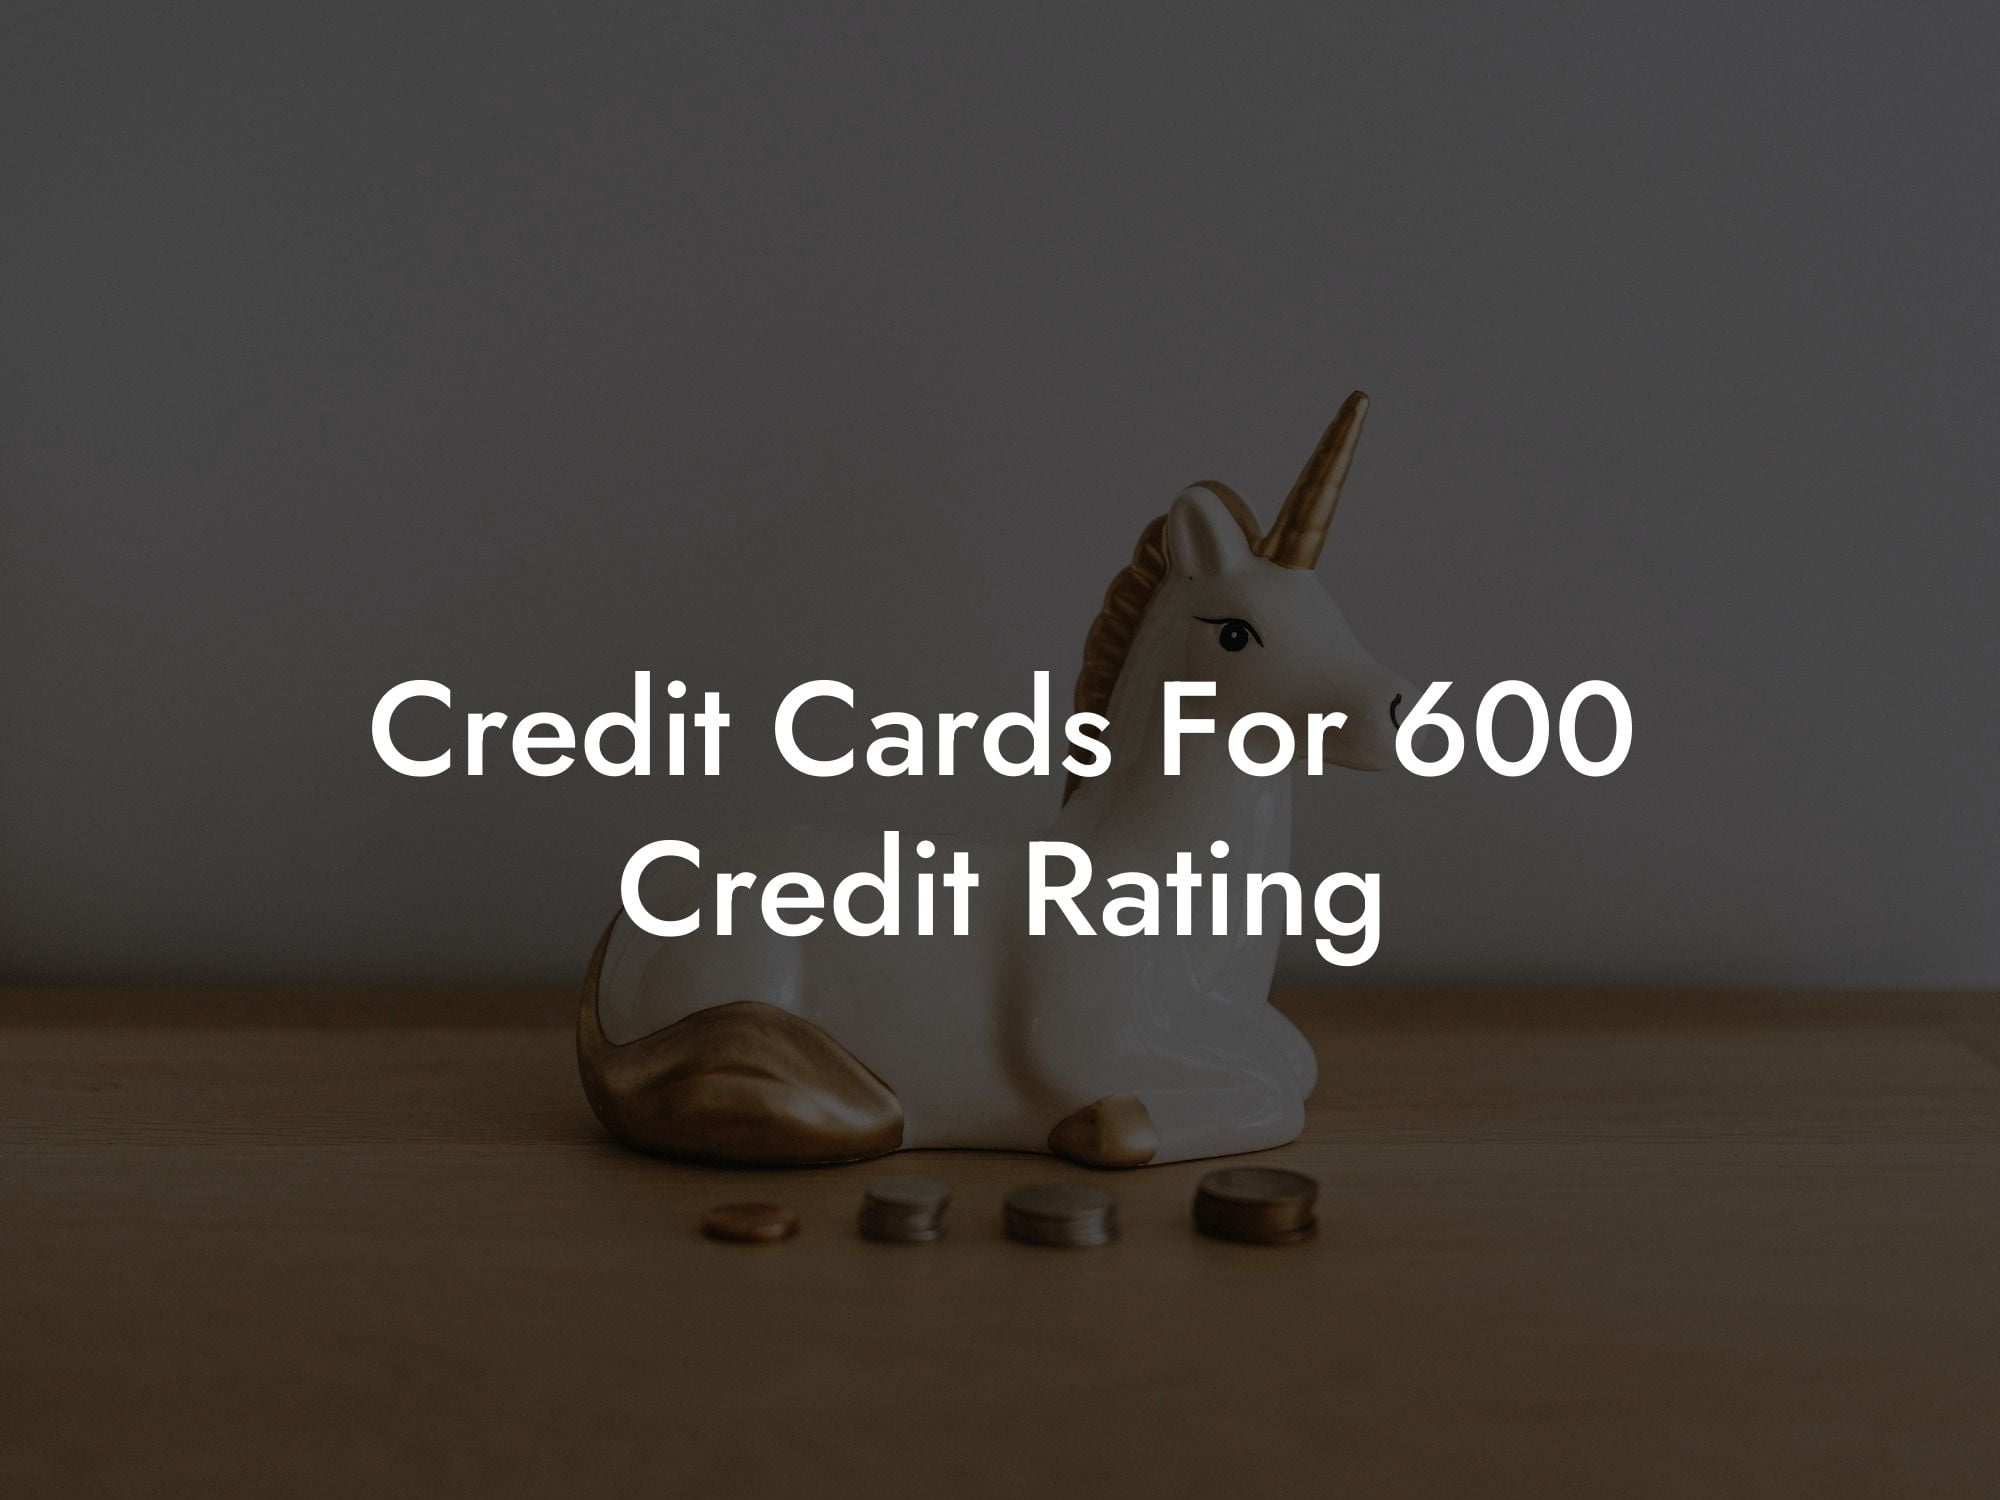 Credit Cards For 600 Credit Rating